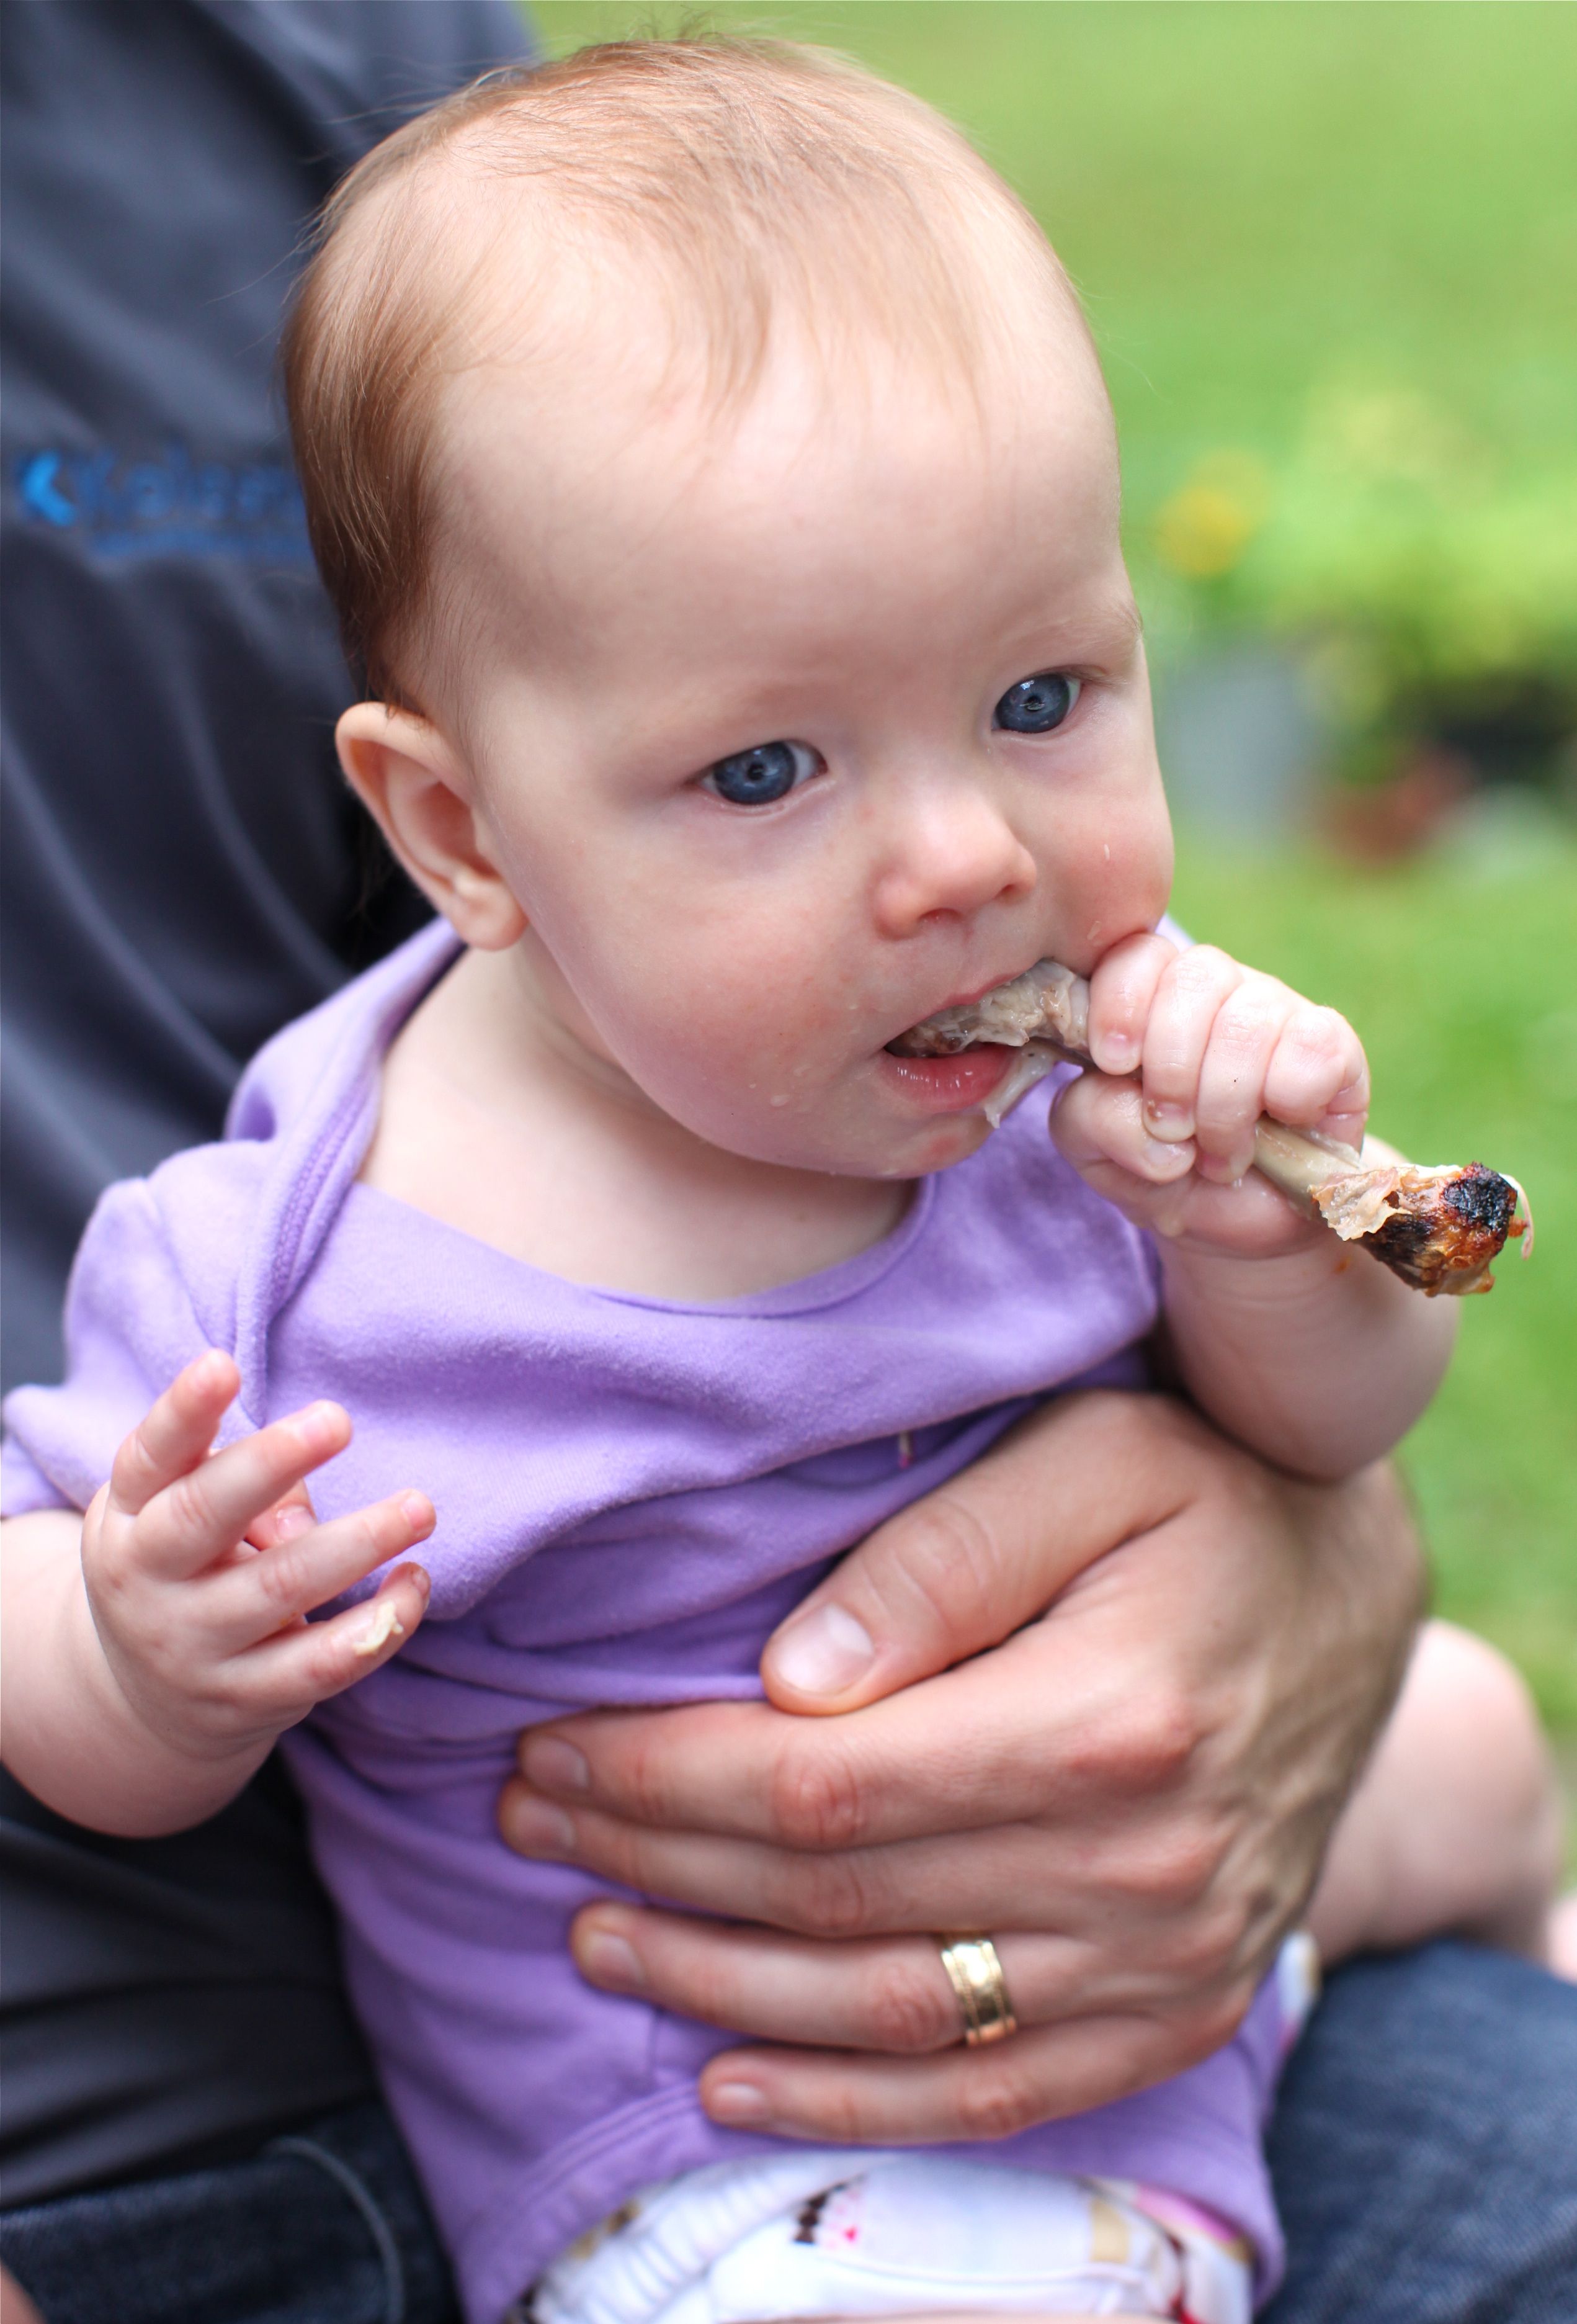 How I discovered and embraced Baby-Led Weaning/Feeding (BLW)